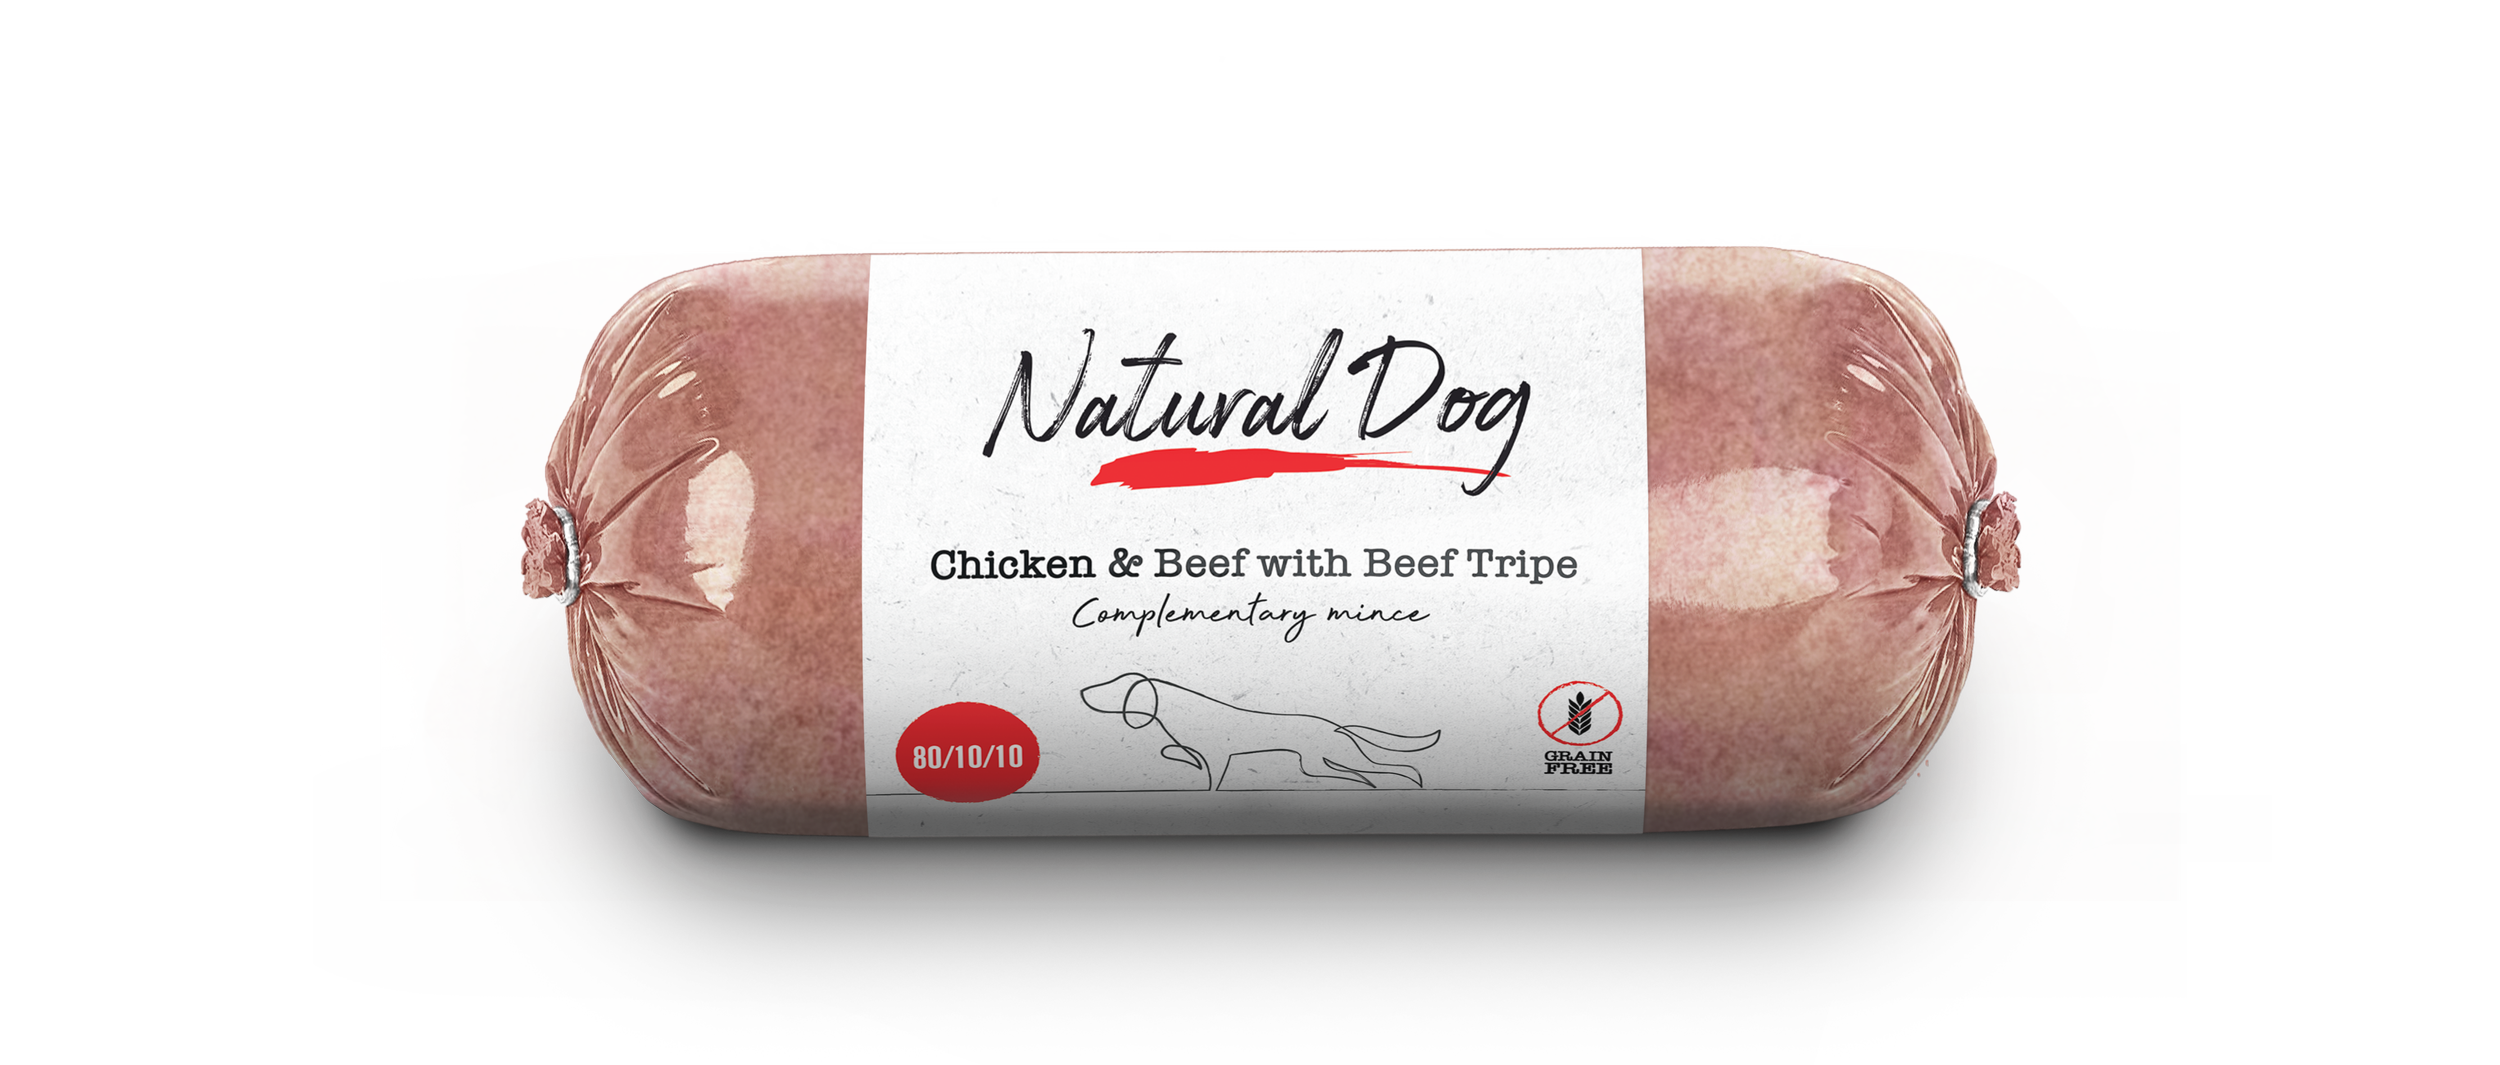 Natural Dog_Top down chub roll_Chicken & Beef with Tripe 2.png